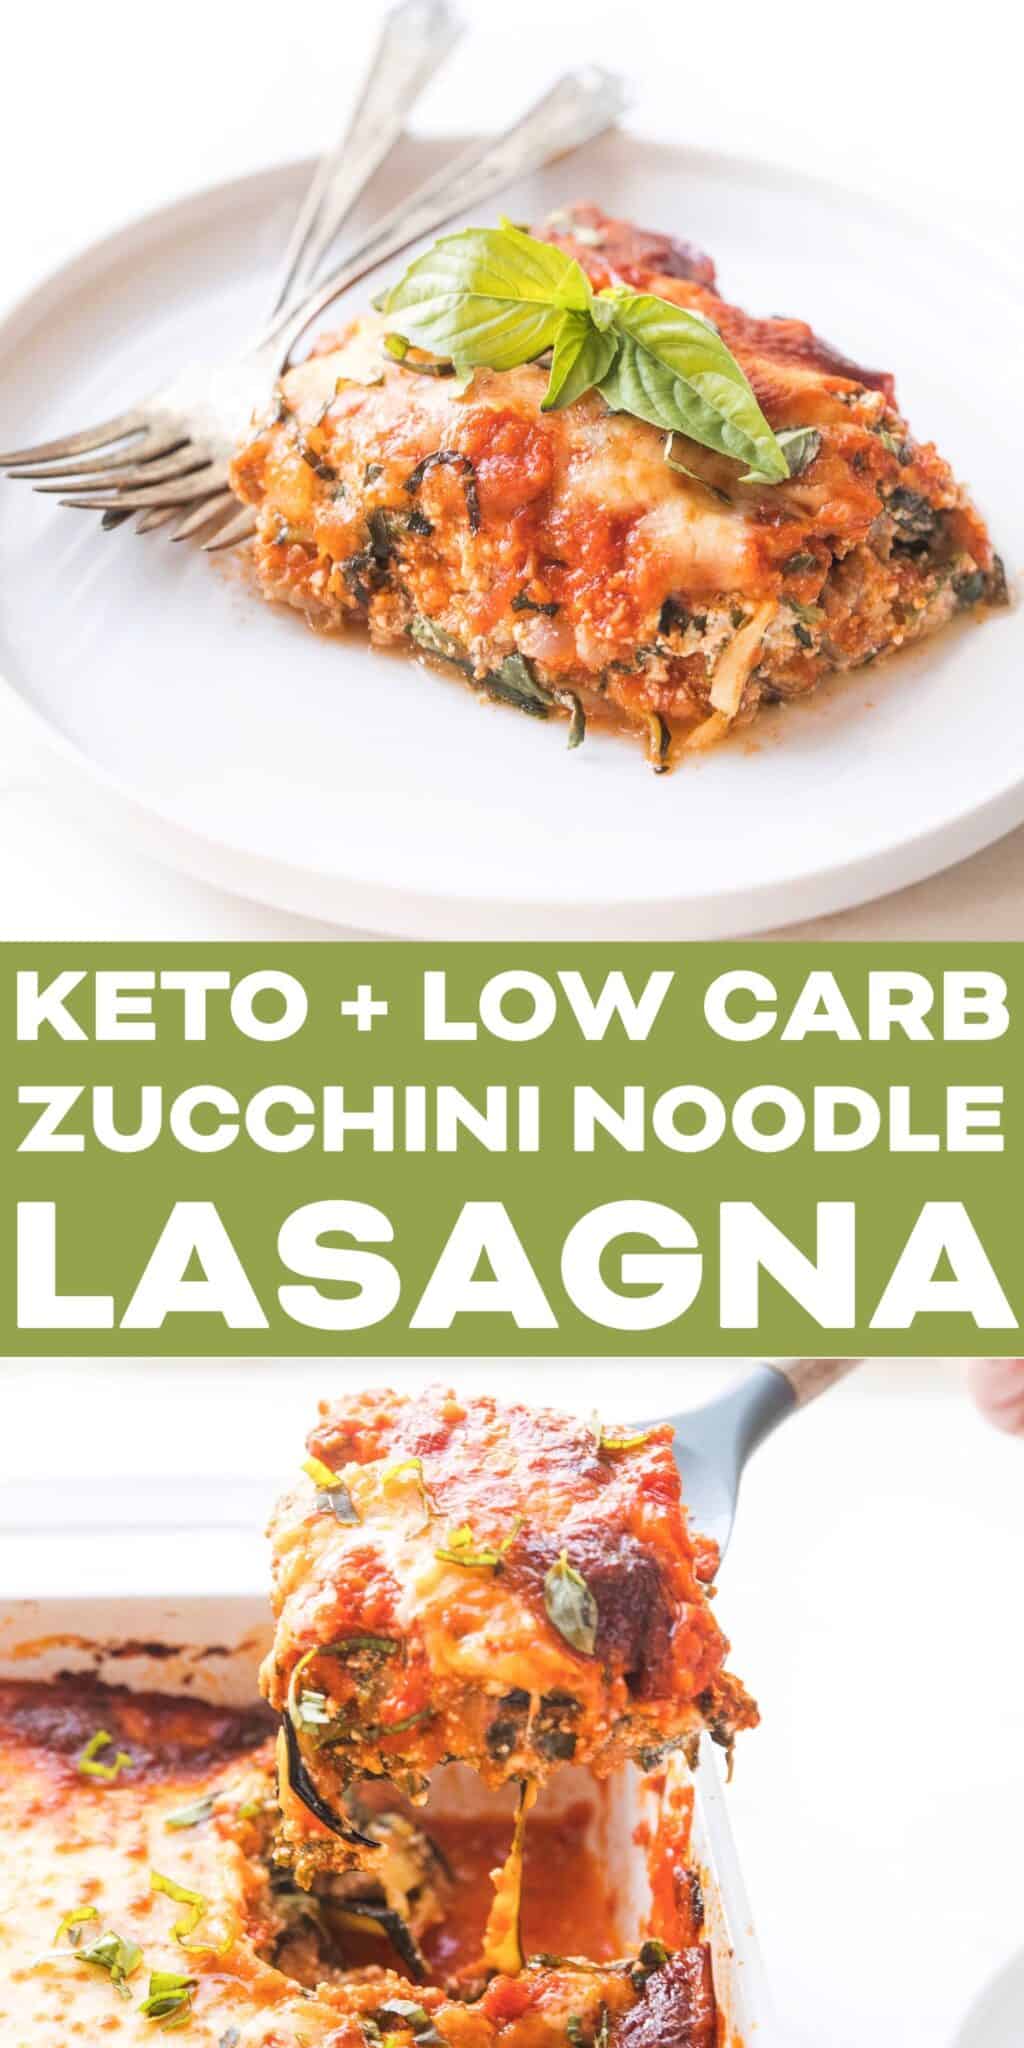 Keto Lasagna with Zucchini Noodles - Tastes Lovely